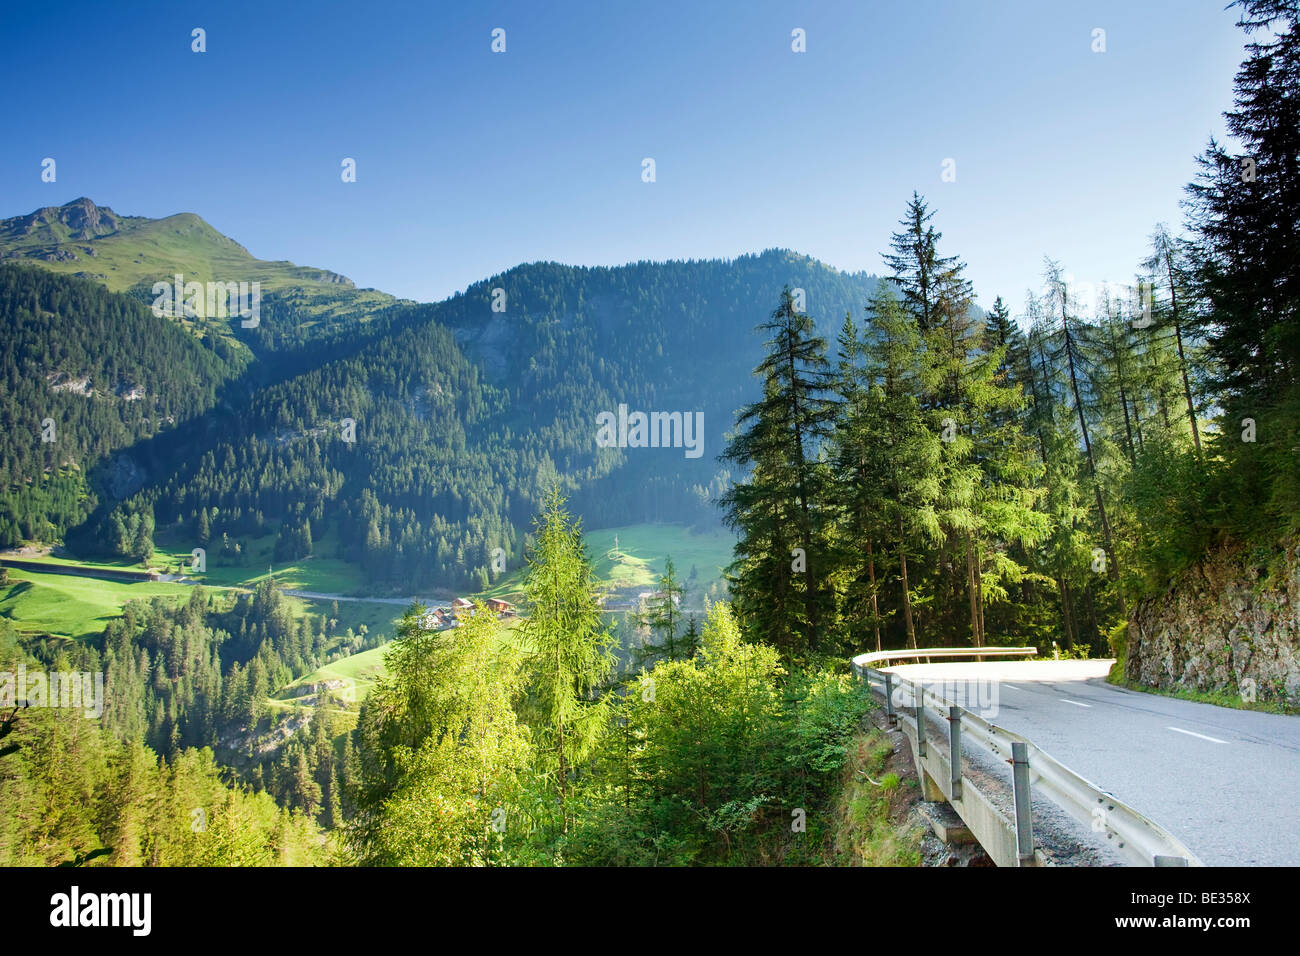 A Road in the swiss alps. Early morning on a mountainous road high in the Swiss Alps. Stock Photo